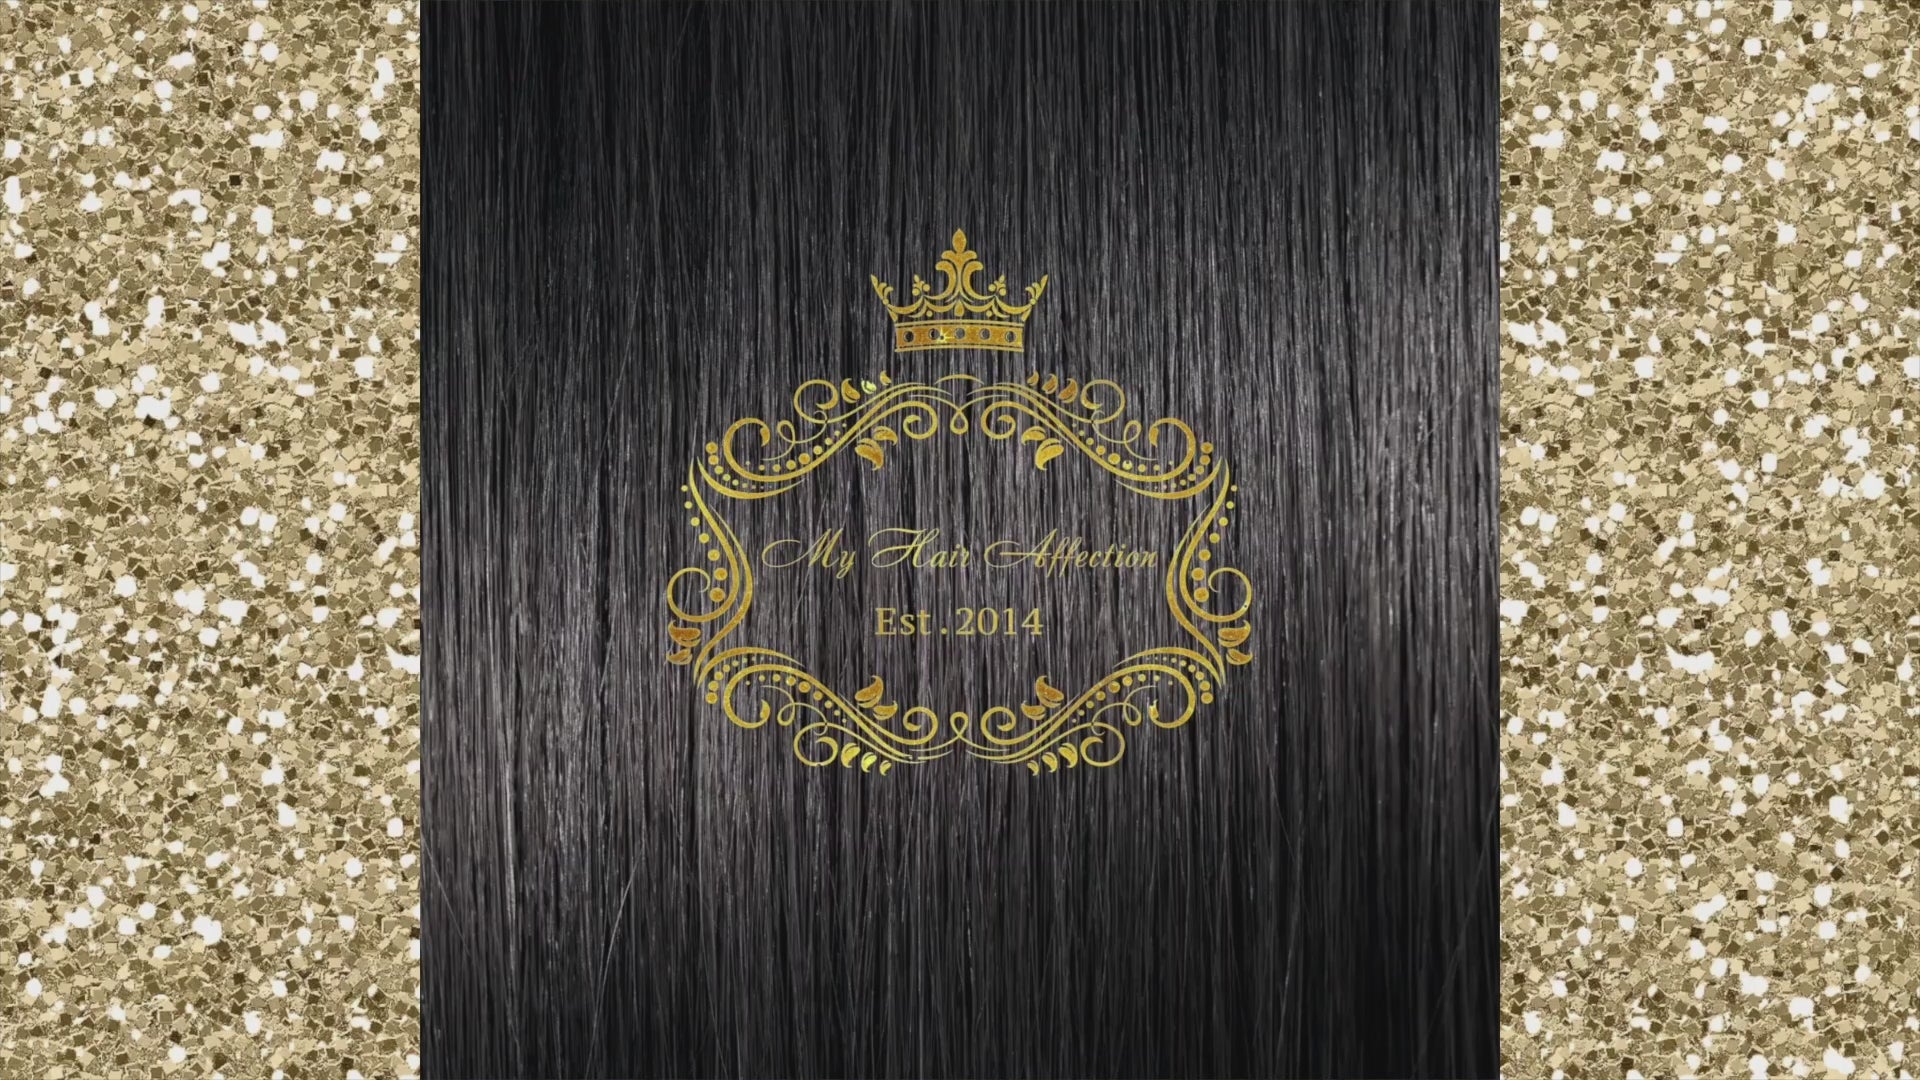 Load video: Exciting Sneak Peek: Get ready for the grand reopening of My Hair Affection! Our upcoming video showcases the anticipation and excitement surrounding our return. Join us for a glimpse into our stunning hair extensions collection and stay tuned for the big day!